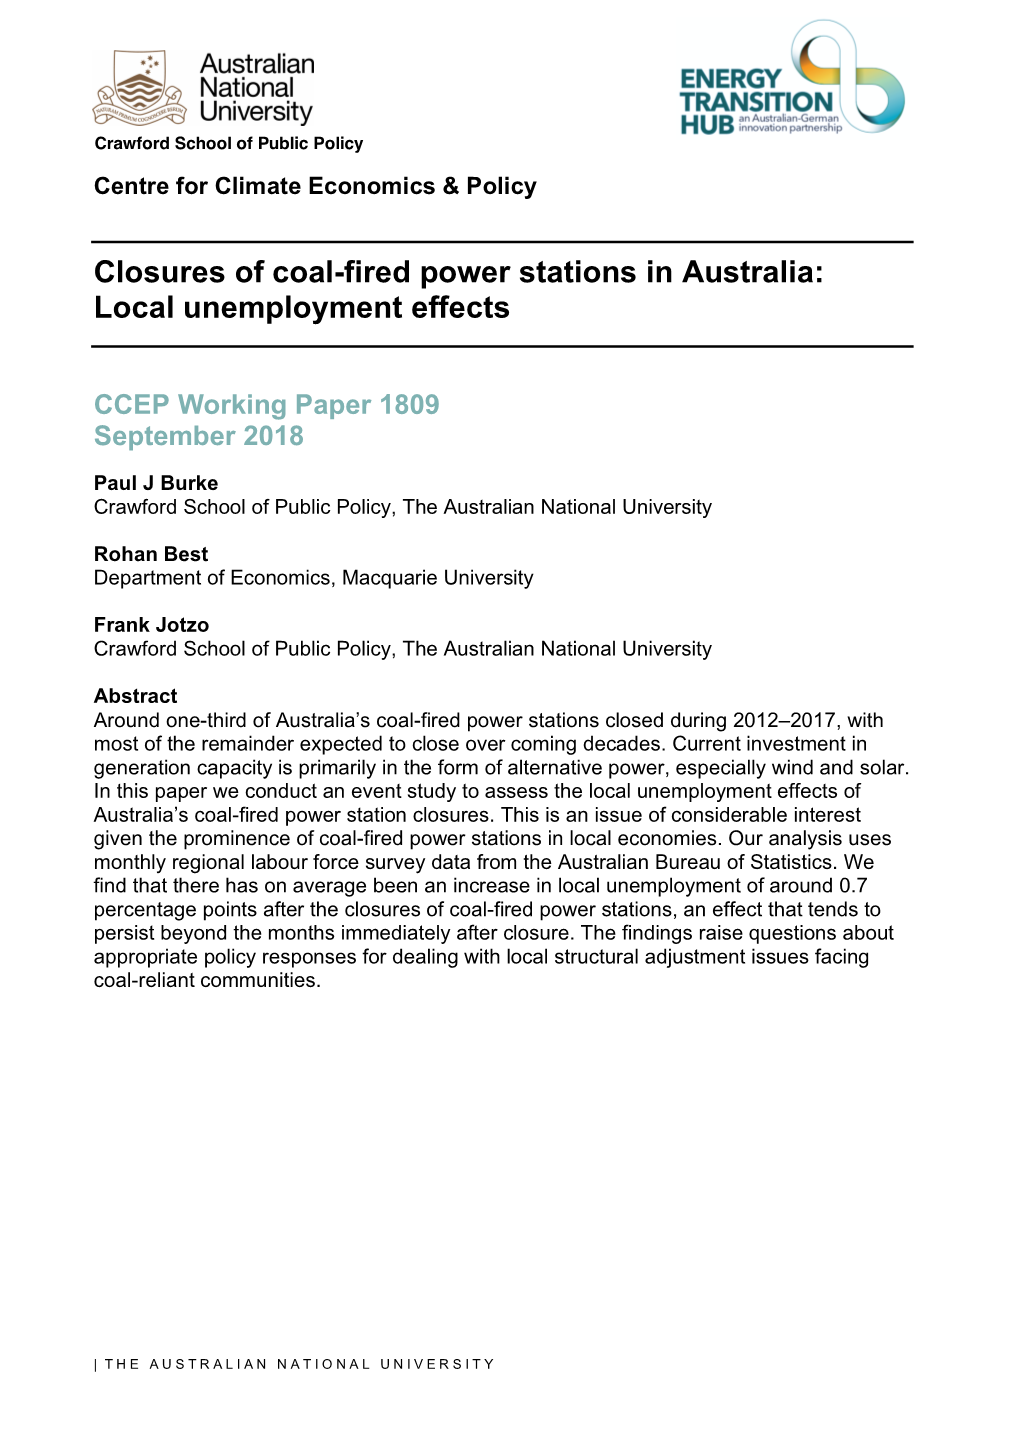 Closures of Coal-Fired Power Stations in Australia: Local Unemployment Effects